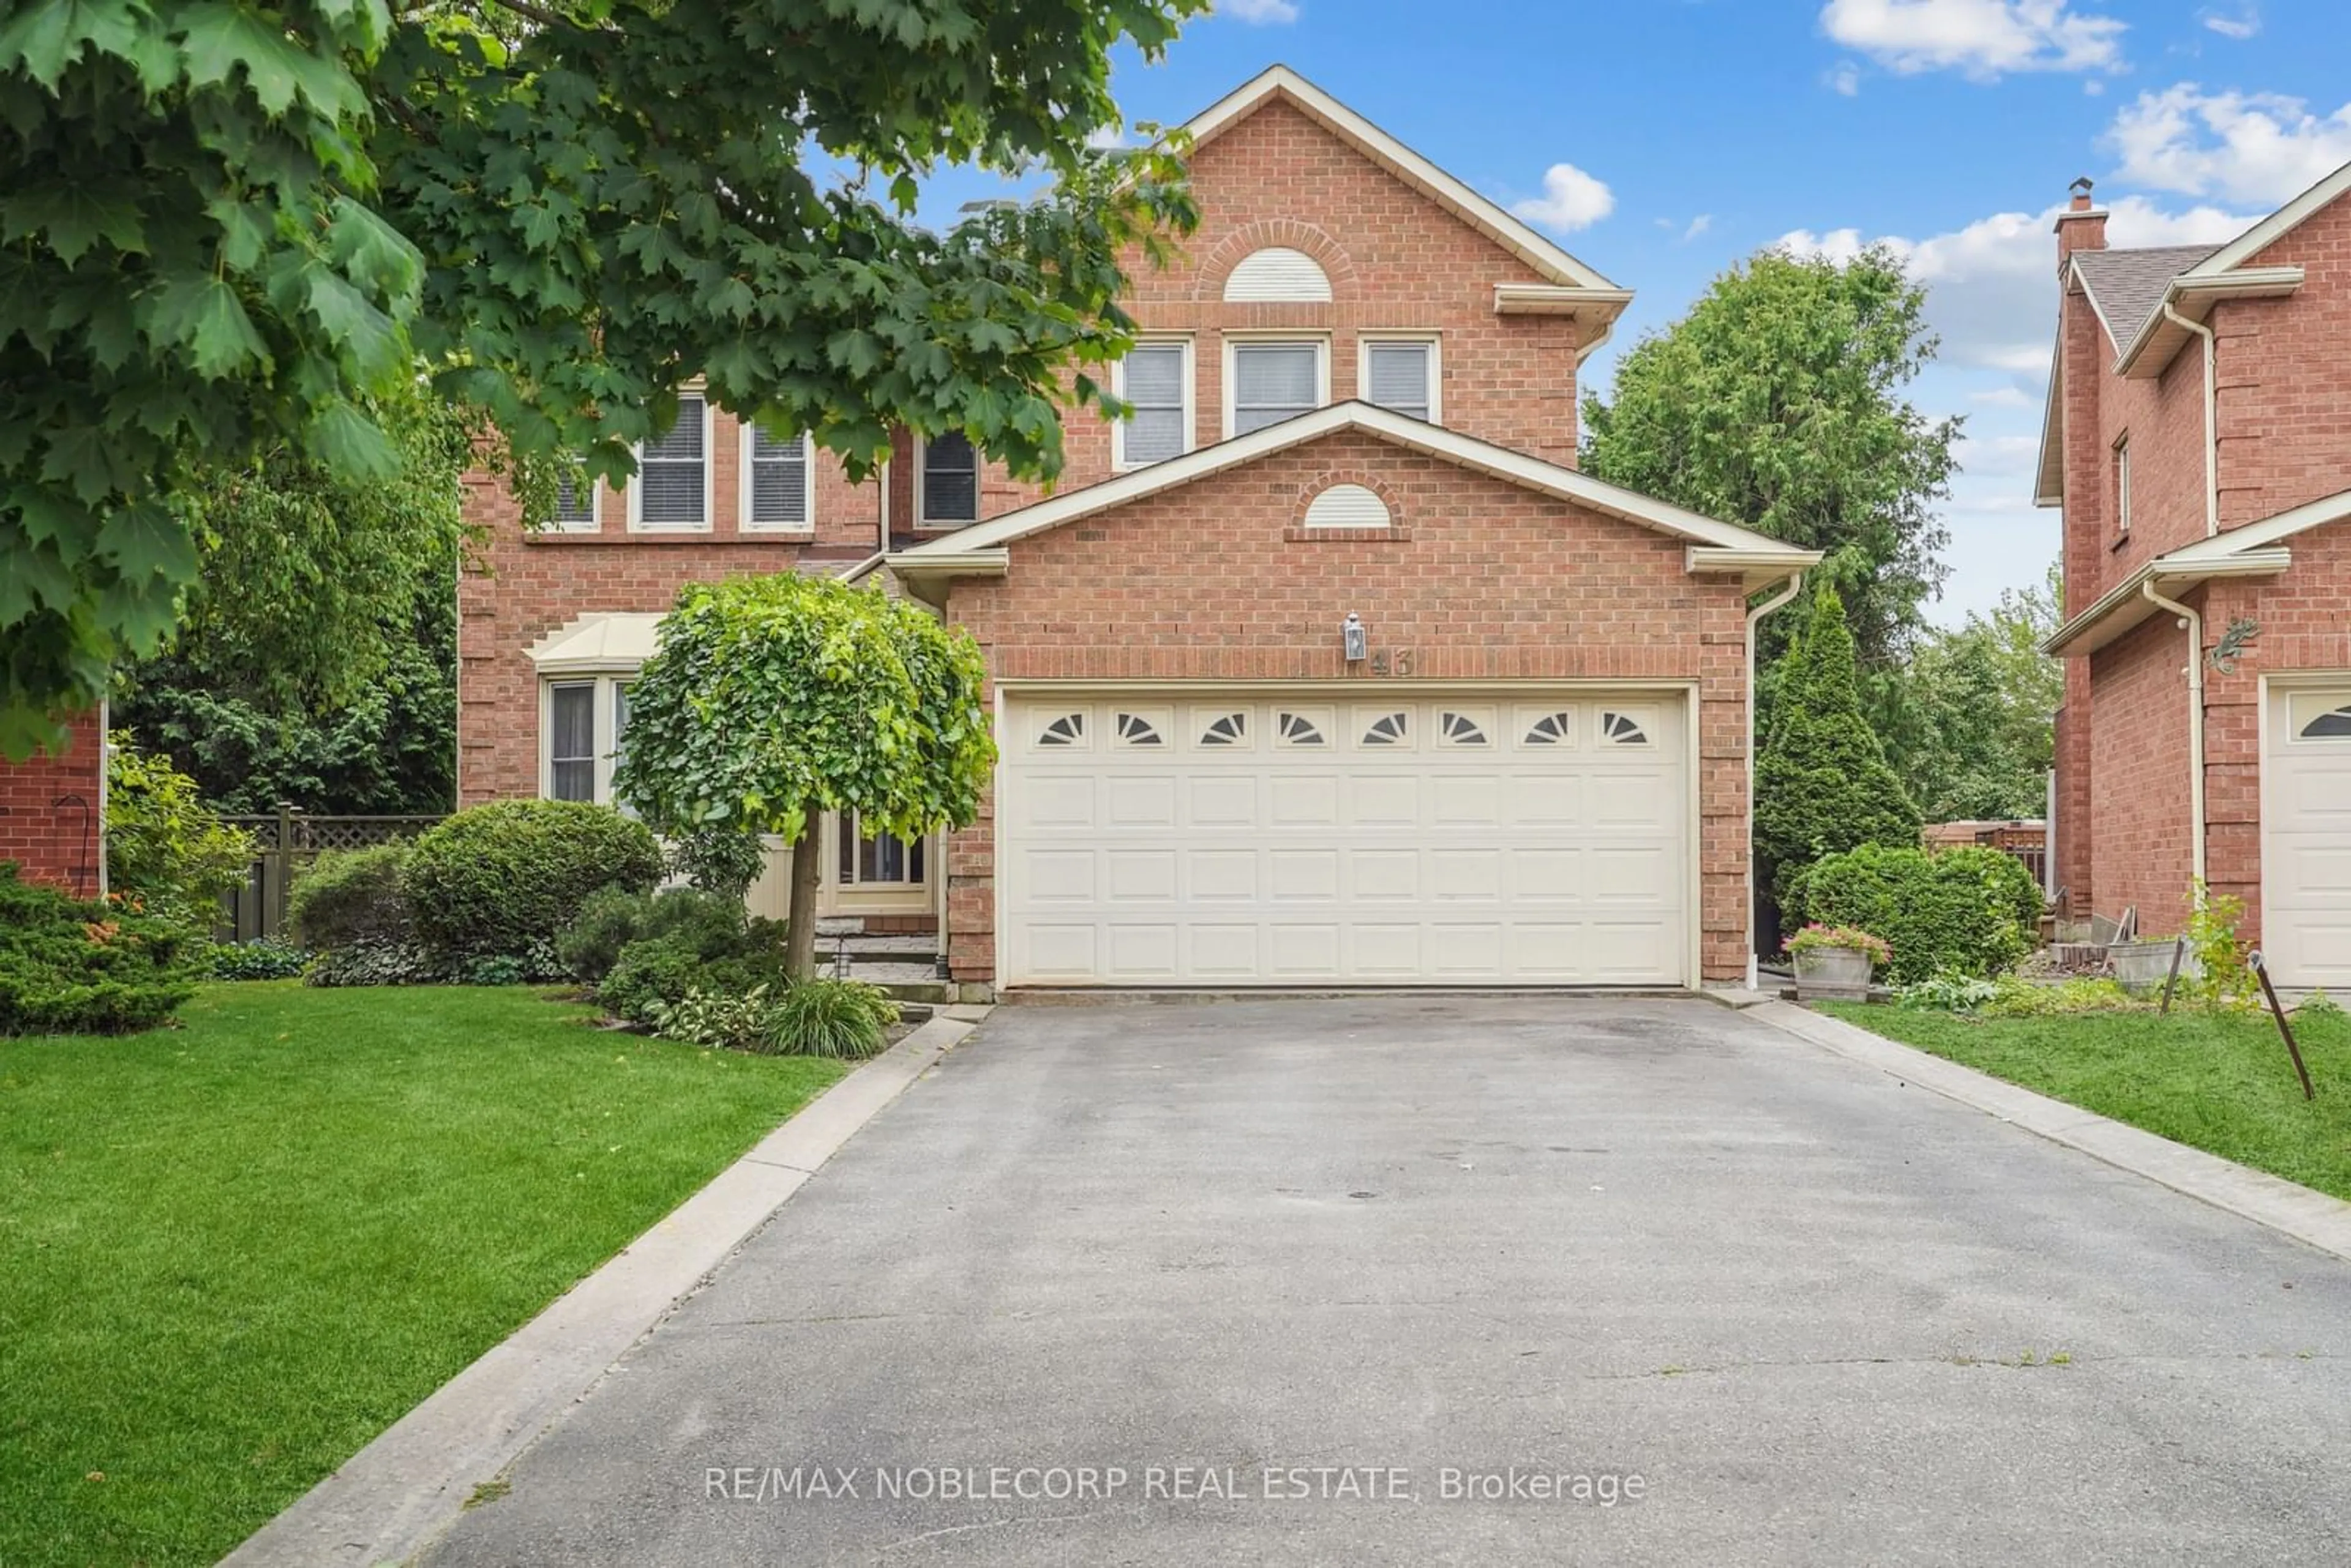 Home with brick exterior material for 43 Enola Pl, Vaughan Ontario L6A 1L9